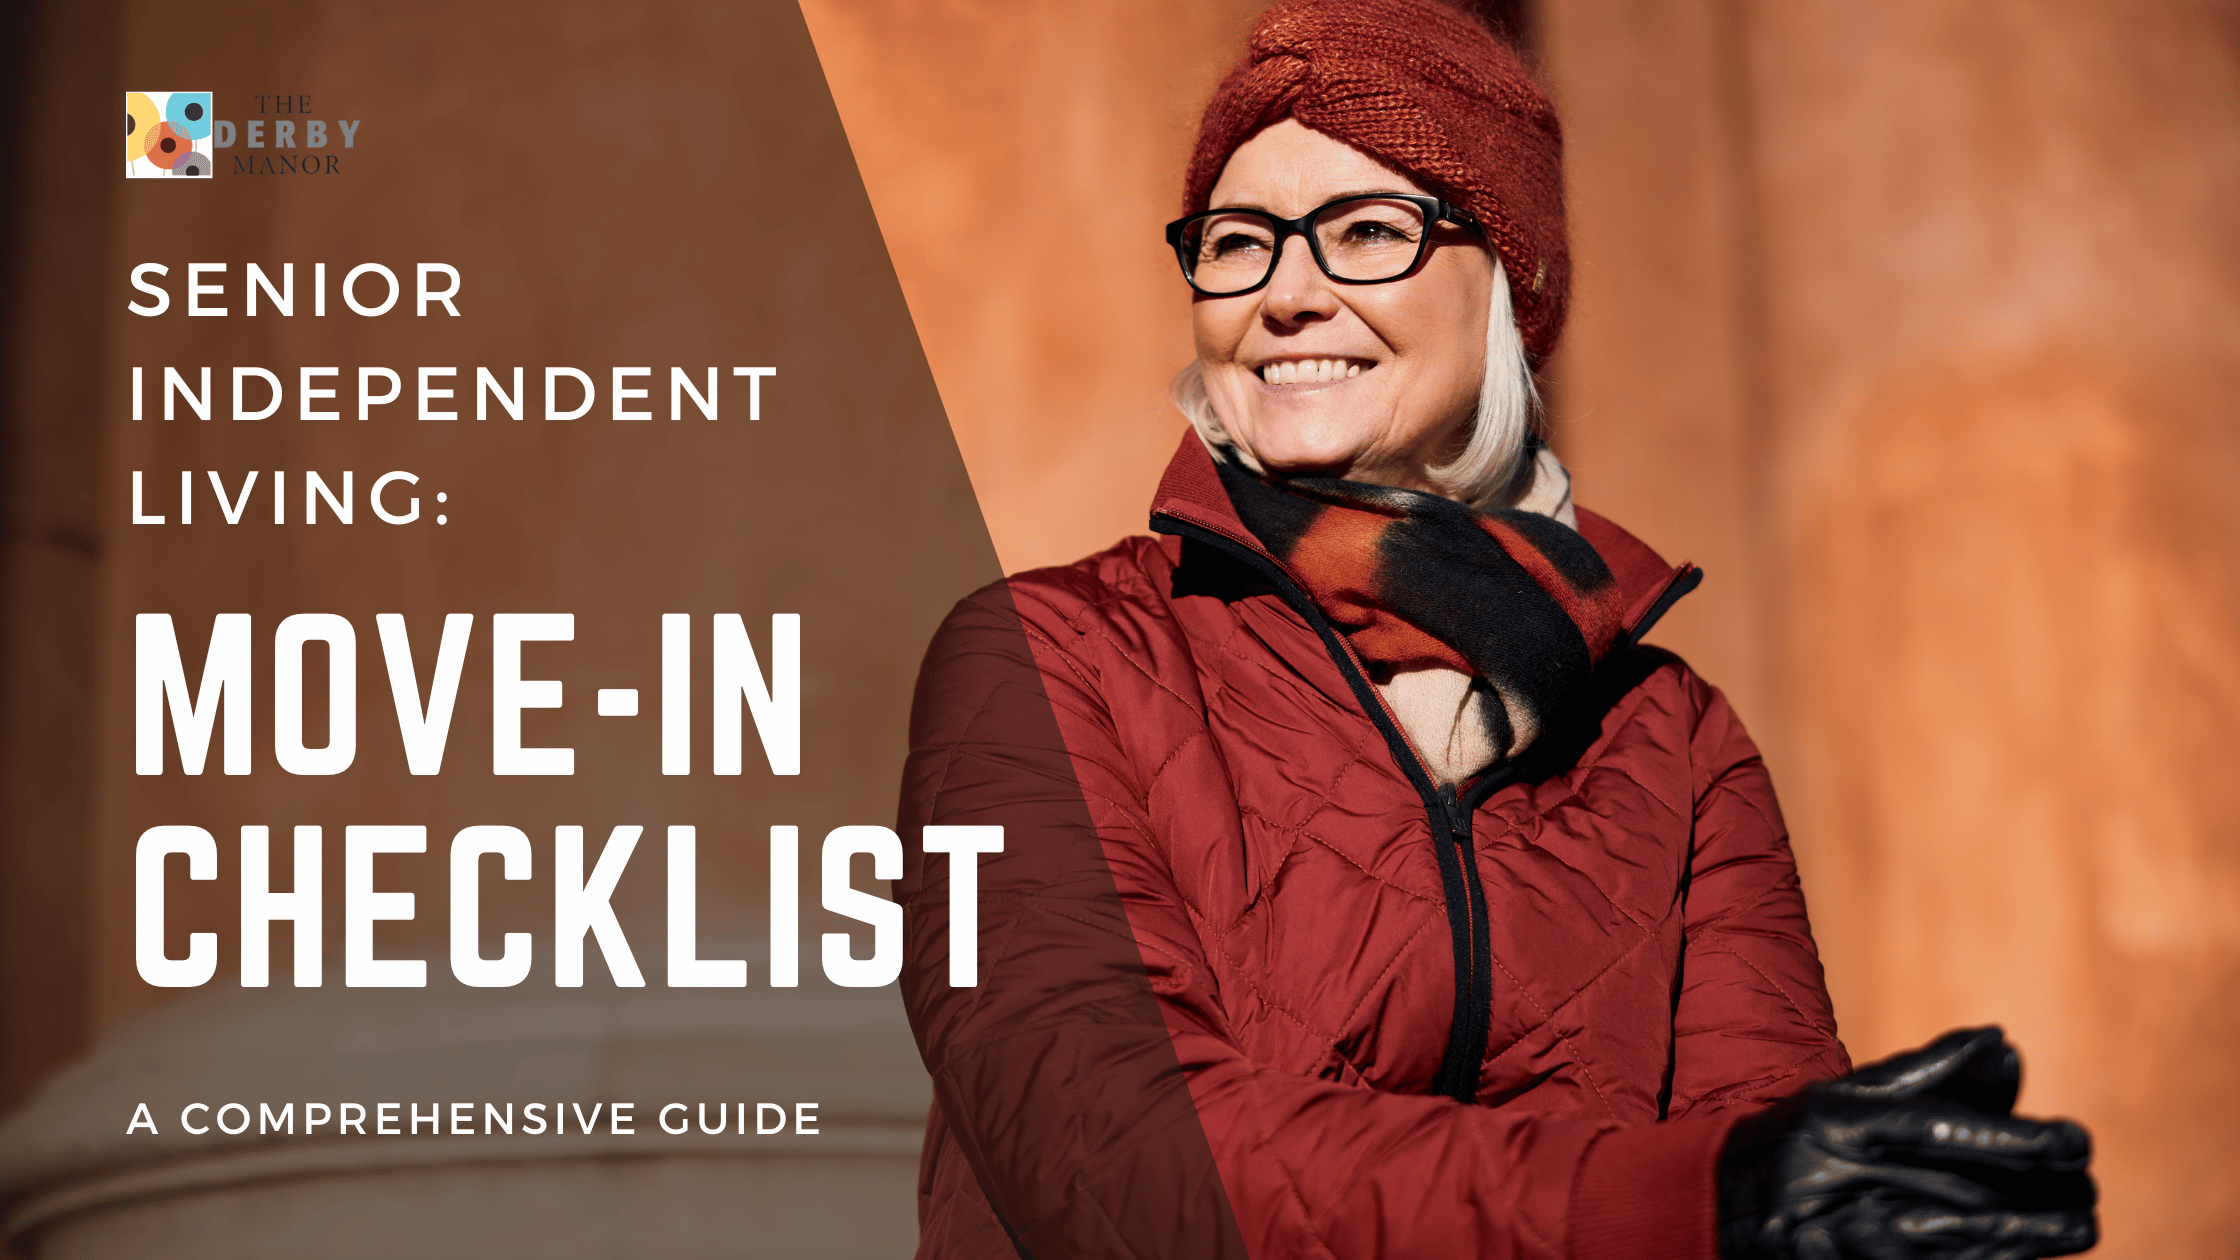 The Ultimate Checklist for Moving to Senior Independent Living